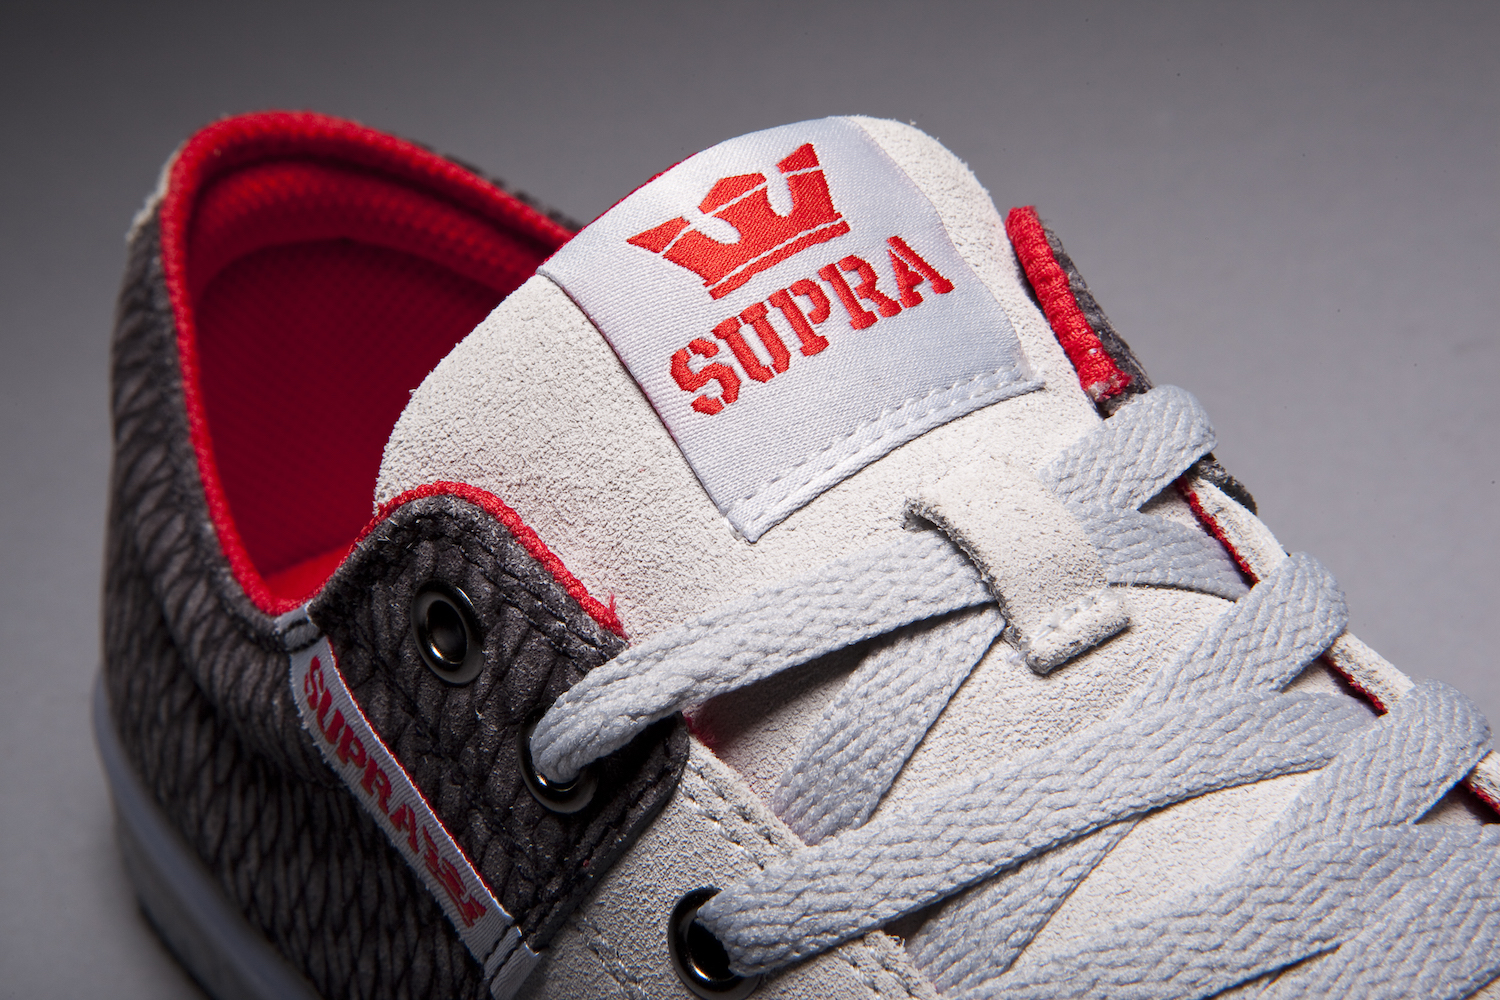 supra and assassins creed footwear collection 8